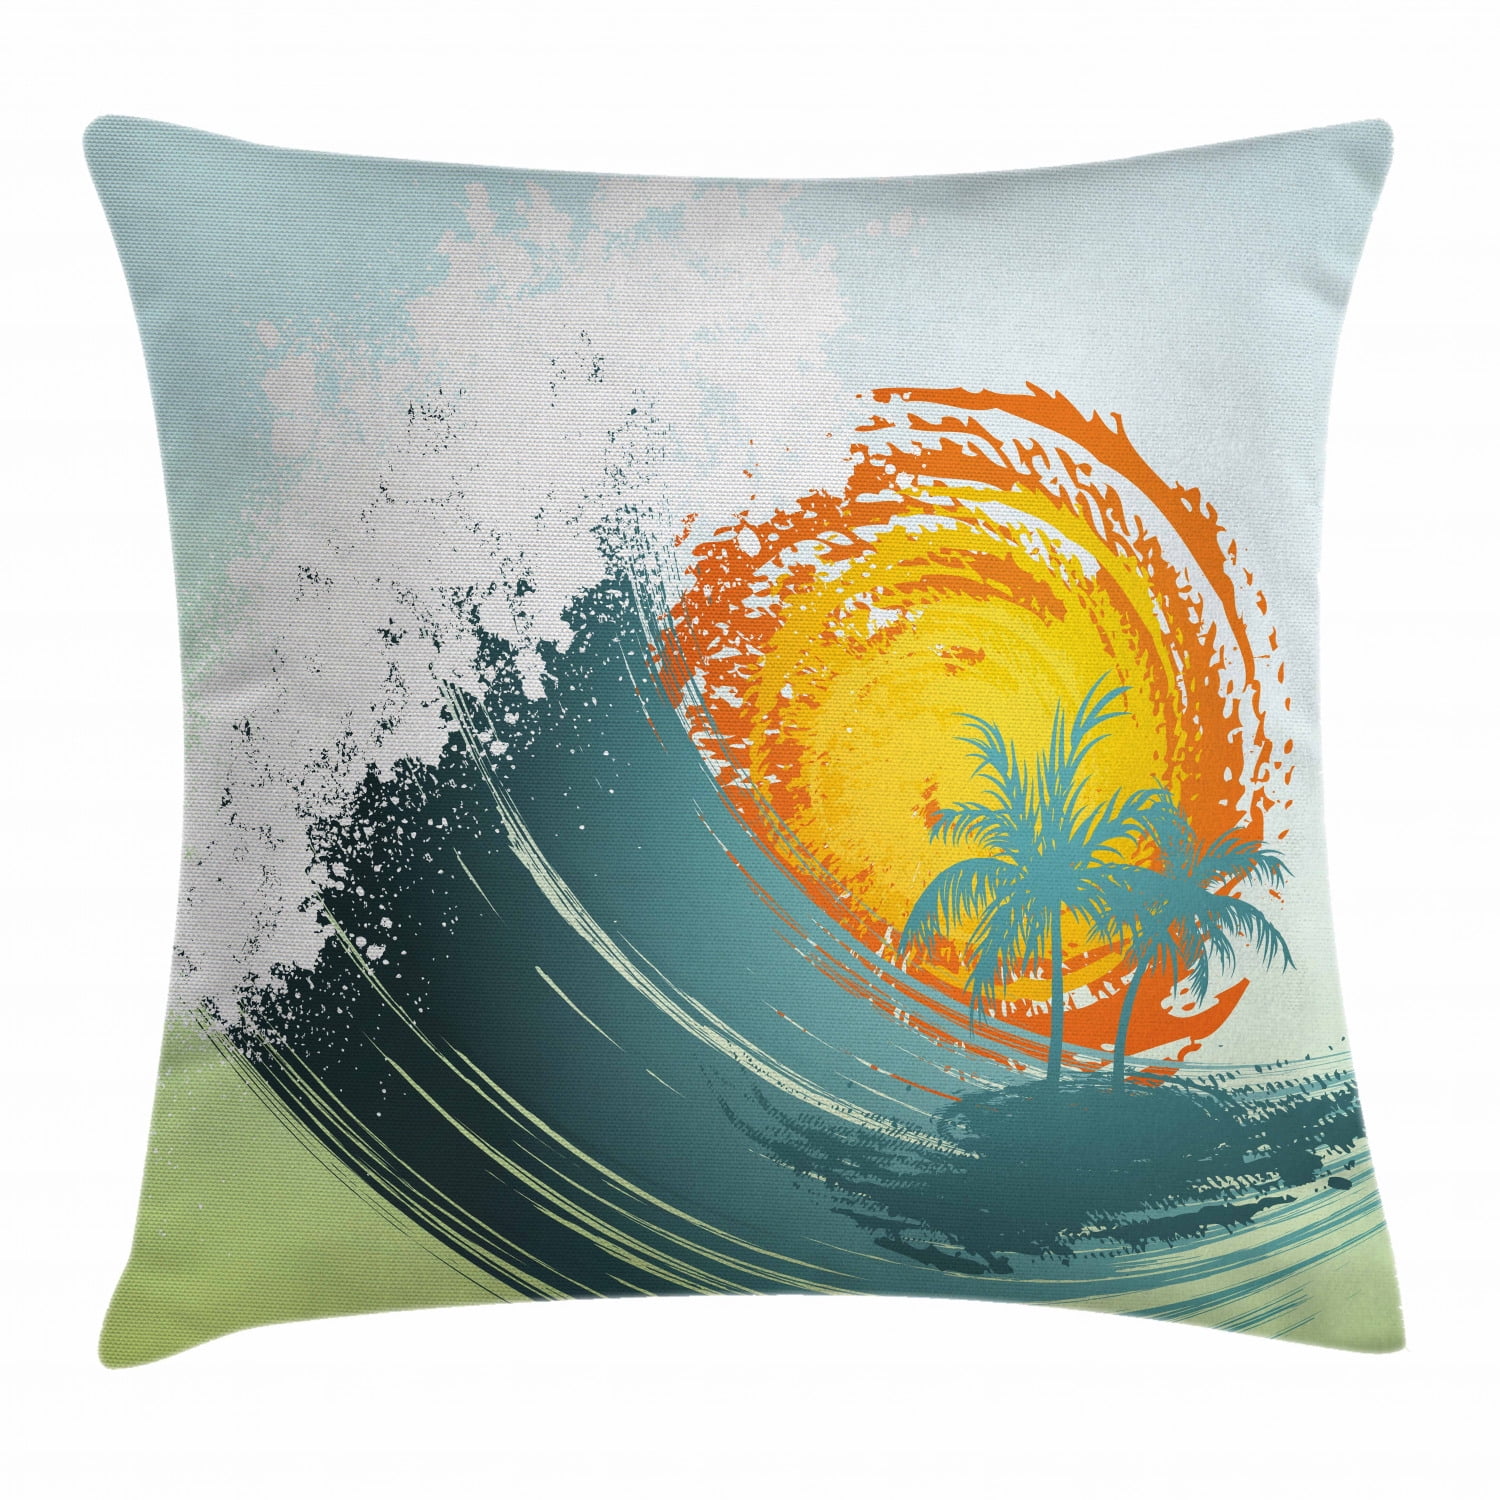 Orange Grey Easternproject Tropical Palm Tree Throw Pillow Cushion Cover Exotic Summer Beach Coconut Palm Leaves Horizon Sunset Decorative Pillow Cases Cotton Linen 12”x20” Pillowslip 